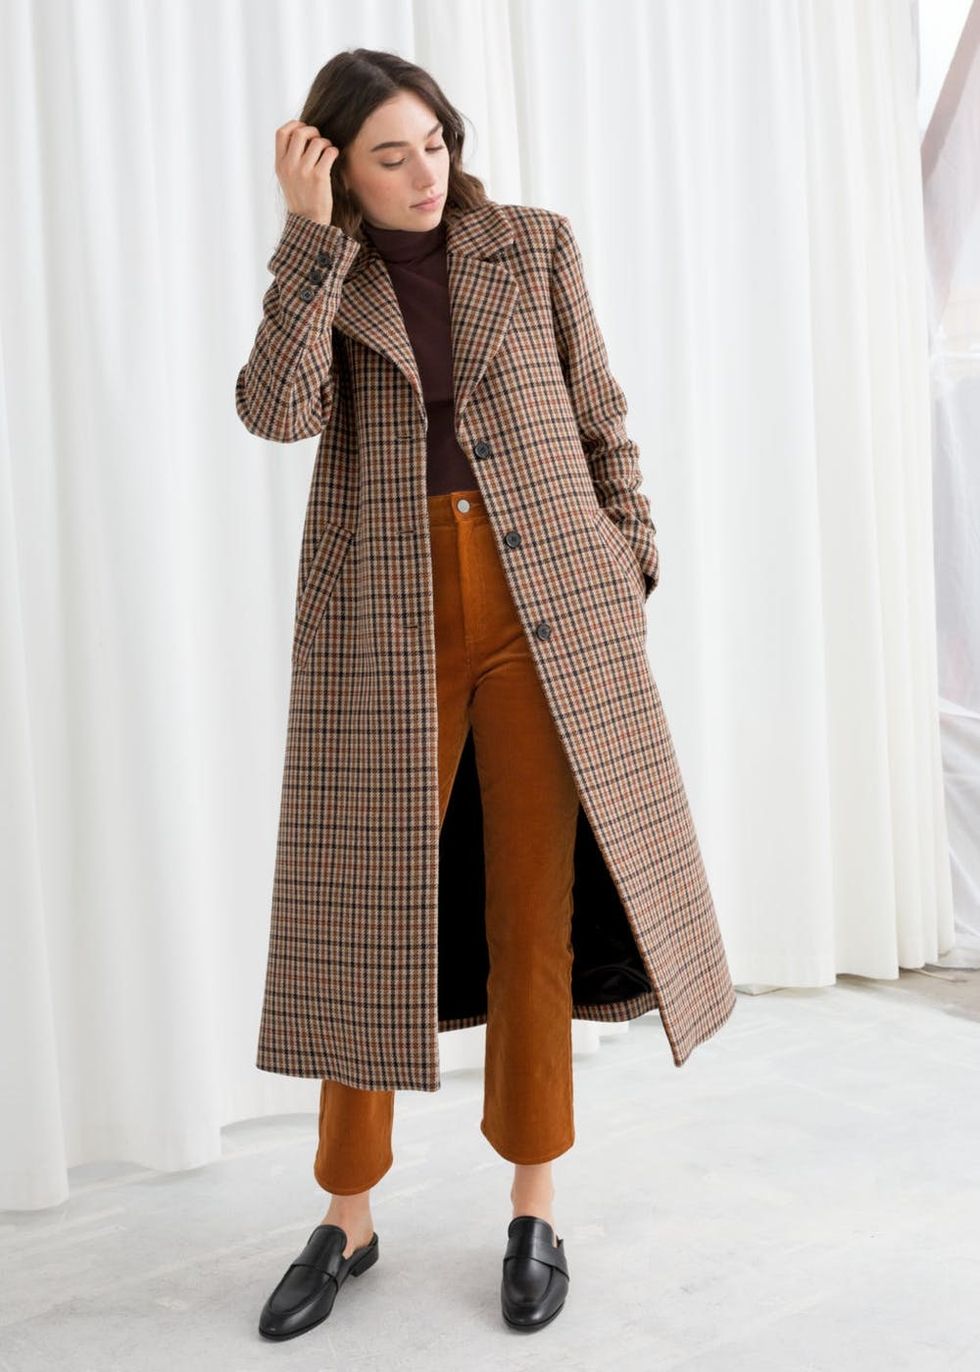 11 Street-Style Coat Trends We Want in 2019 - Brit + Co